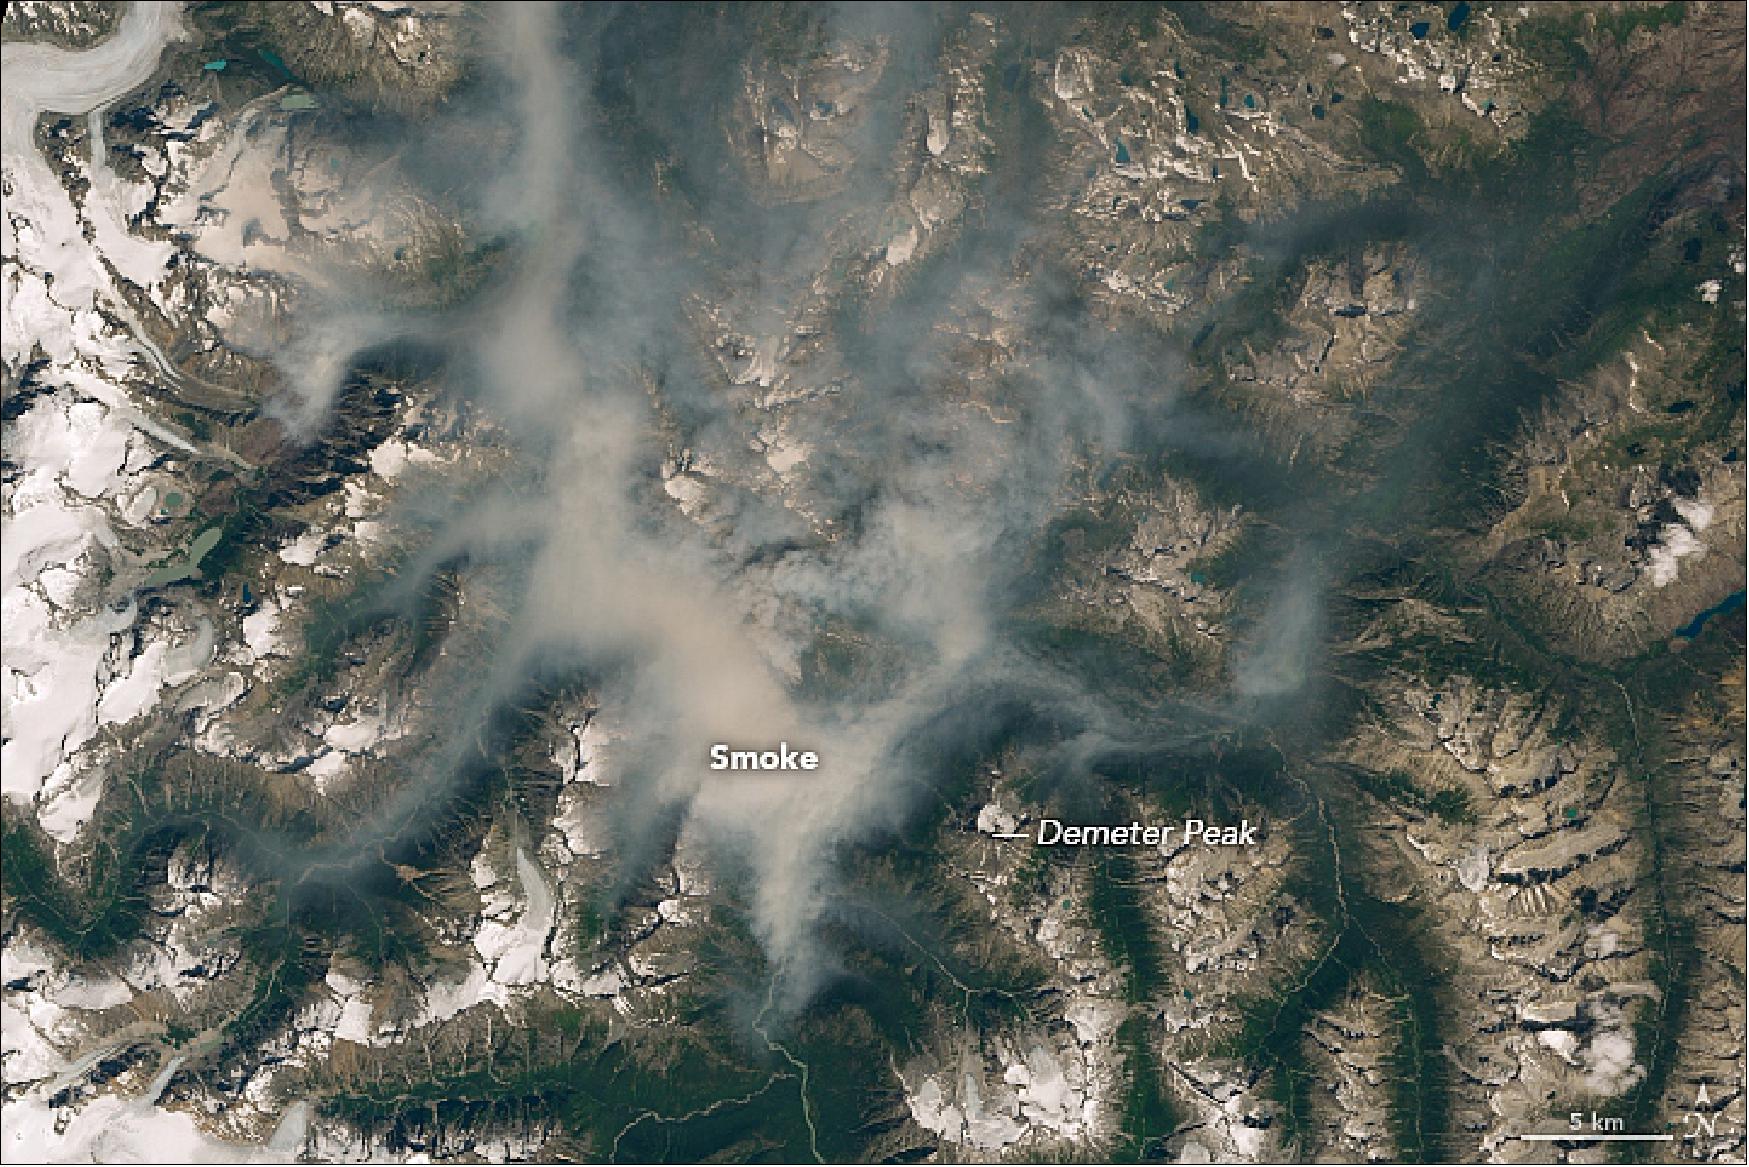 Figure 13: OLI (Operational Land Imager) on Landsat-8 captured this natural-color image of smoke lingering in valleys near the snow-capped peaks of the Coast Mountains on August 7, 2018 (image credit: NASA Earth Observatory image by Lauren Dauphin using Landsat data from the U.S. Geological Survey, story by Adam Voiland)